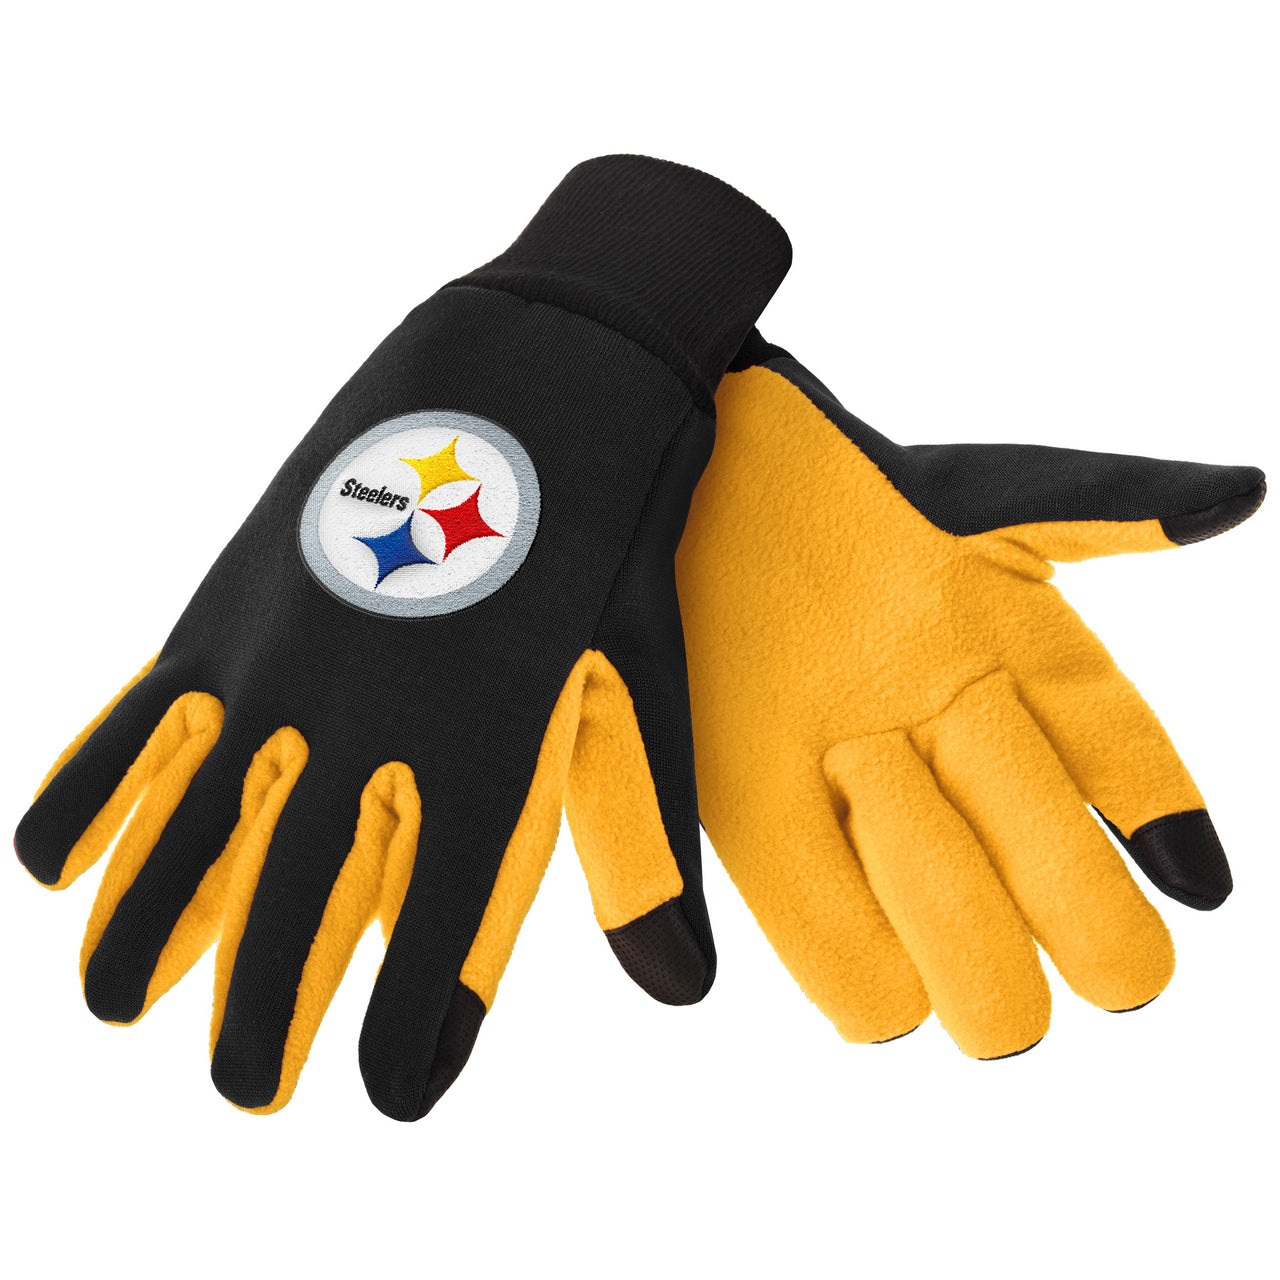 Pittsburgh Steelers NFL Football Texting Gloves - Dynasty Sports & Framing 